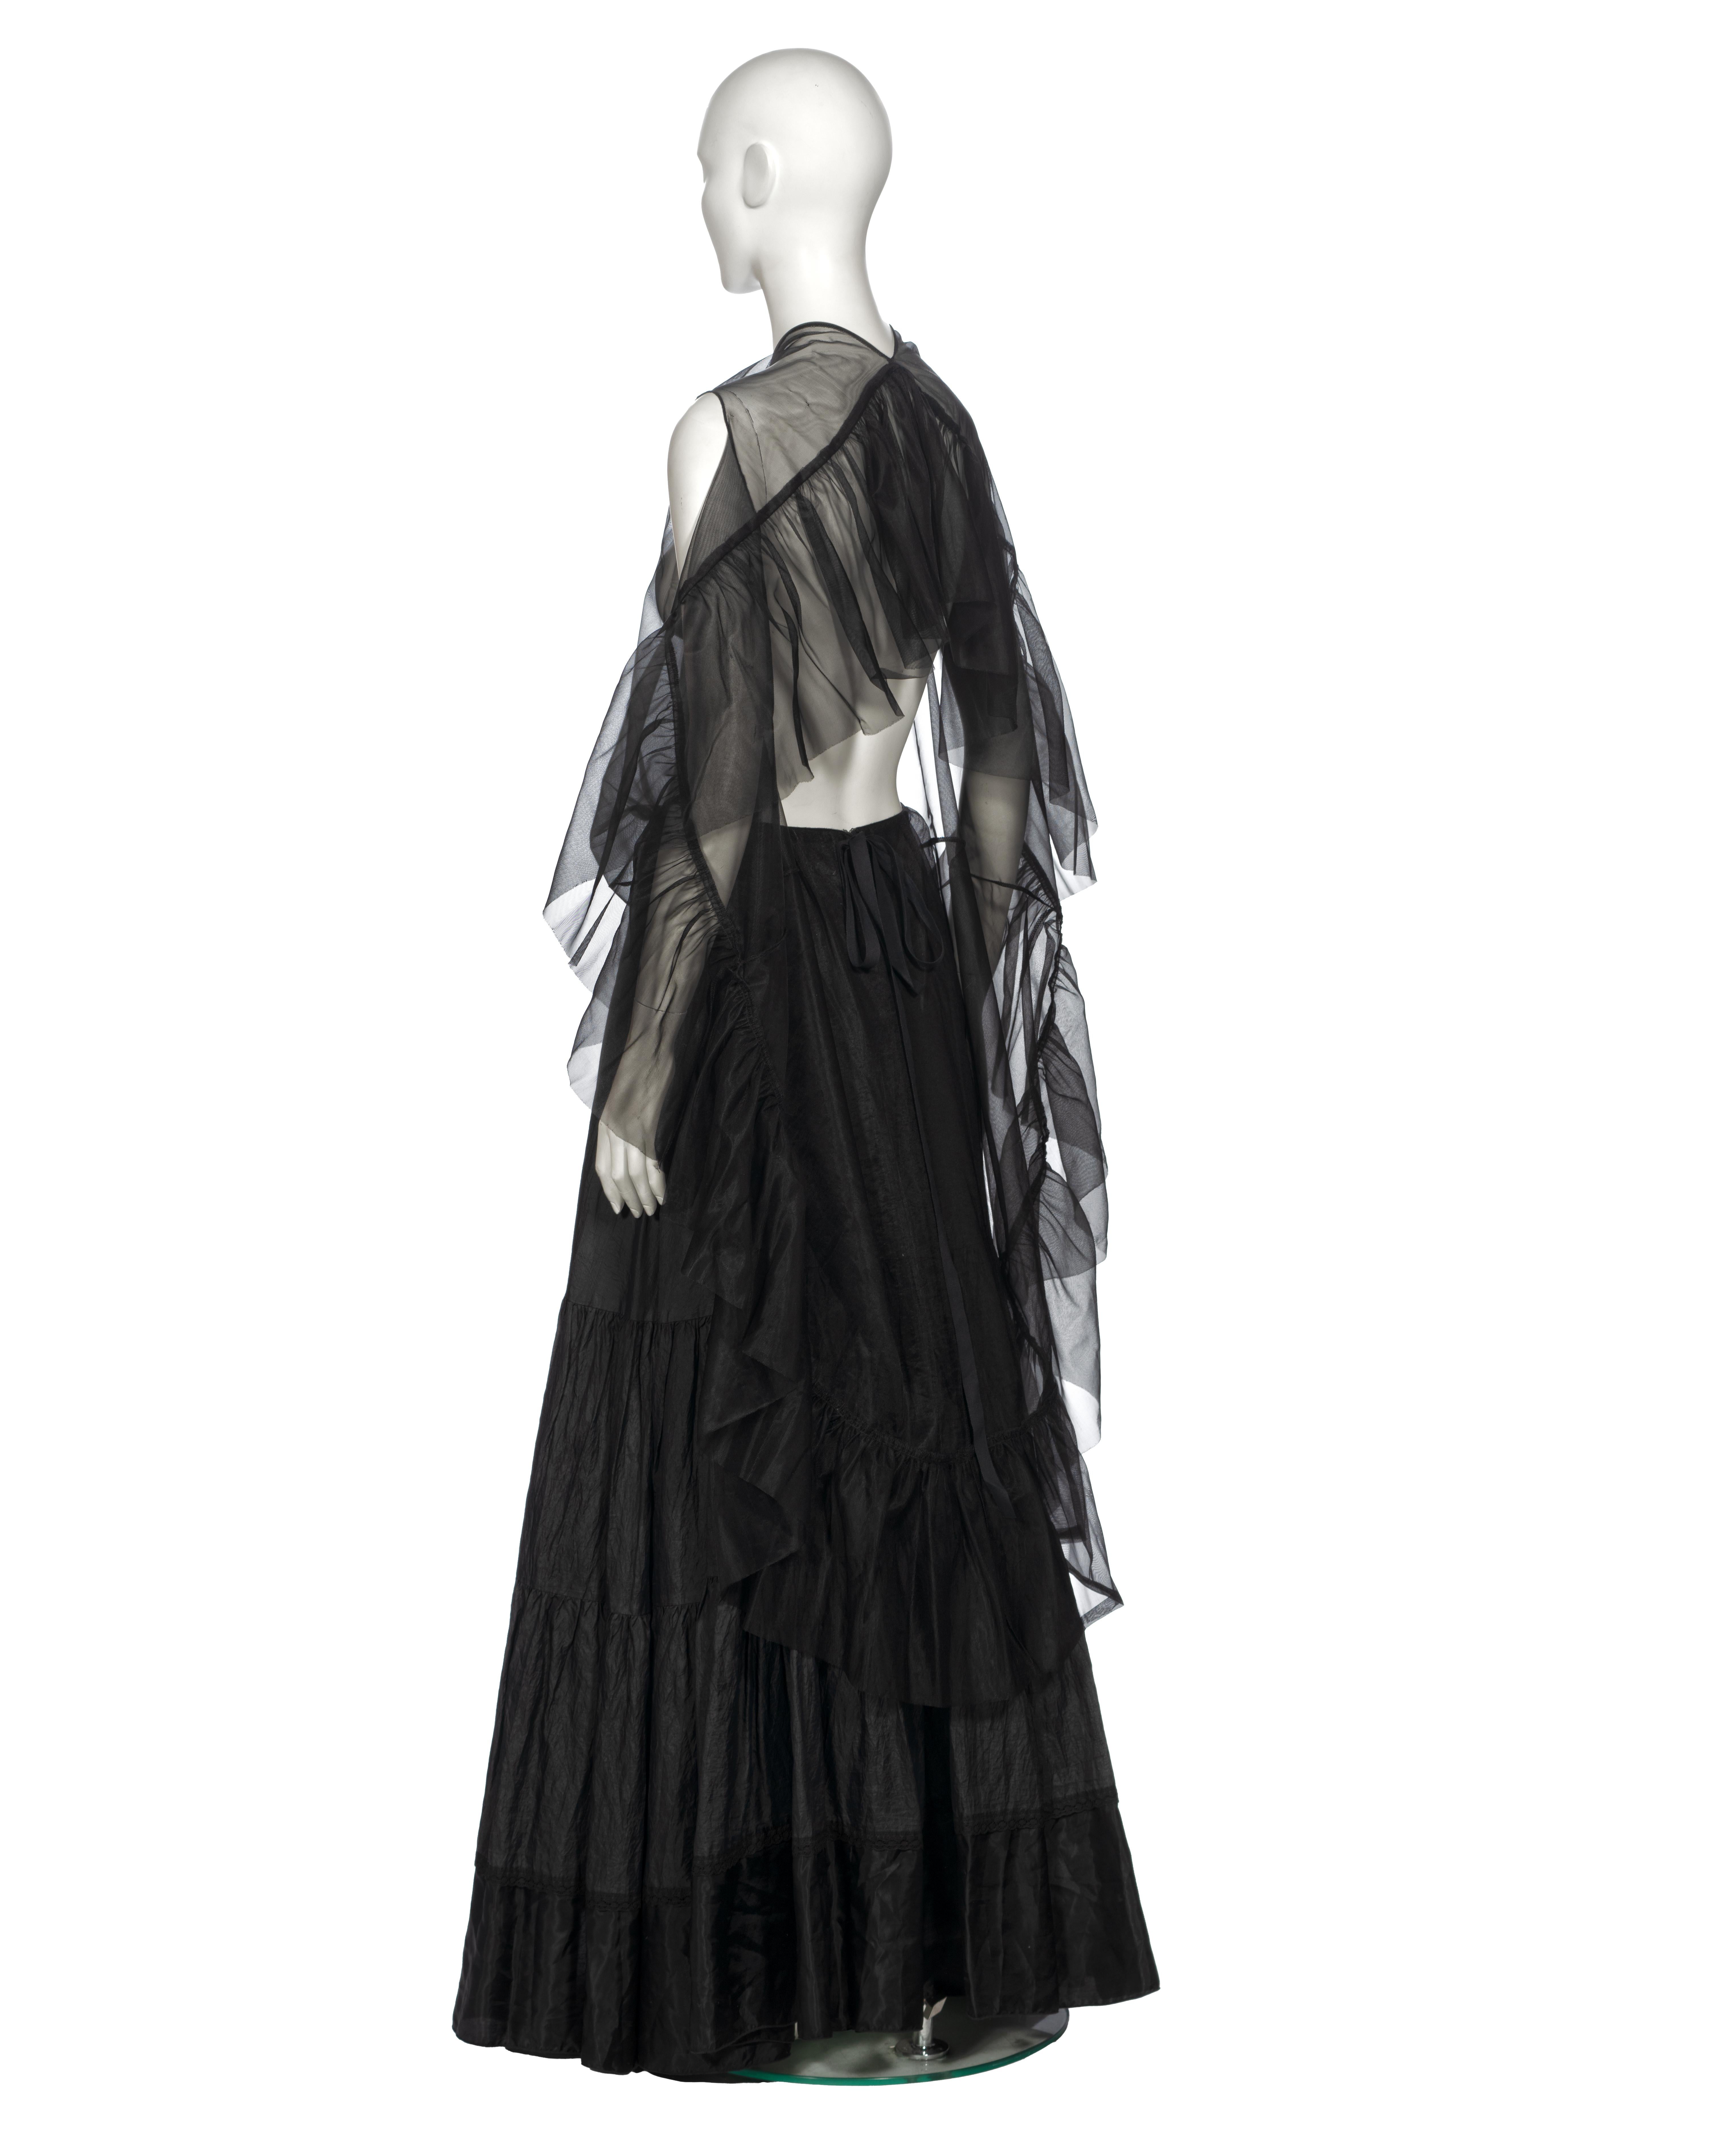 Martin Margiela Artisanal Evening Dress Made Out Of Vintage Petticoats, ss 2003 For Sale 6